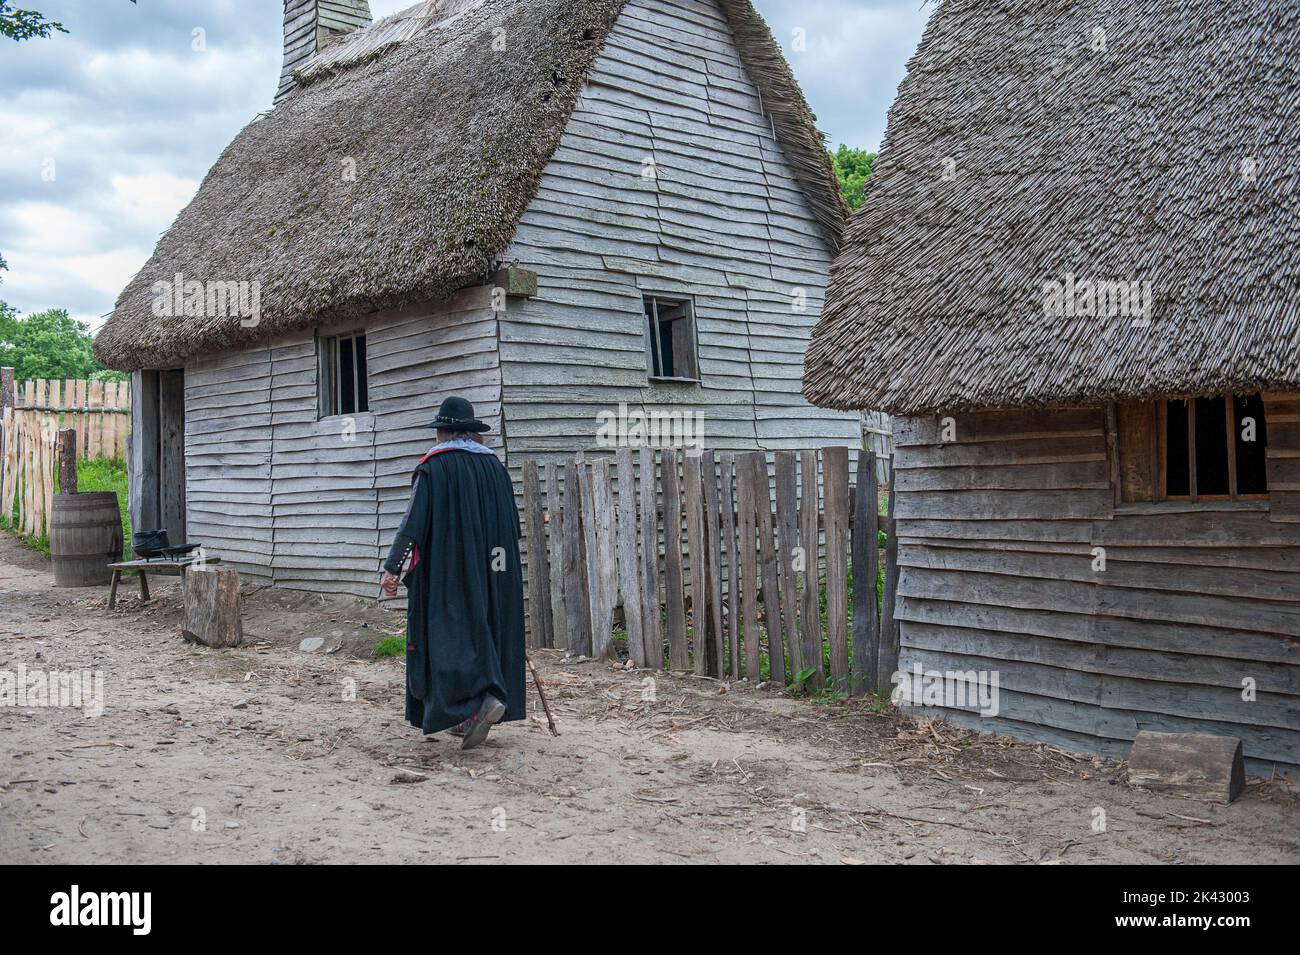 Plimoth Patuxet replicates the original settlement of the Pilgrims at Plymouth Colony, where the first thanksgiving may have been held in 1621. Stock Photo